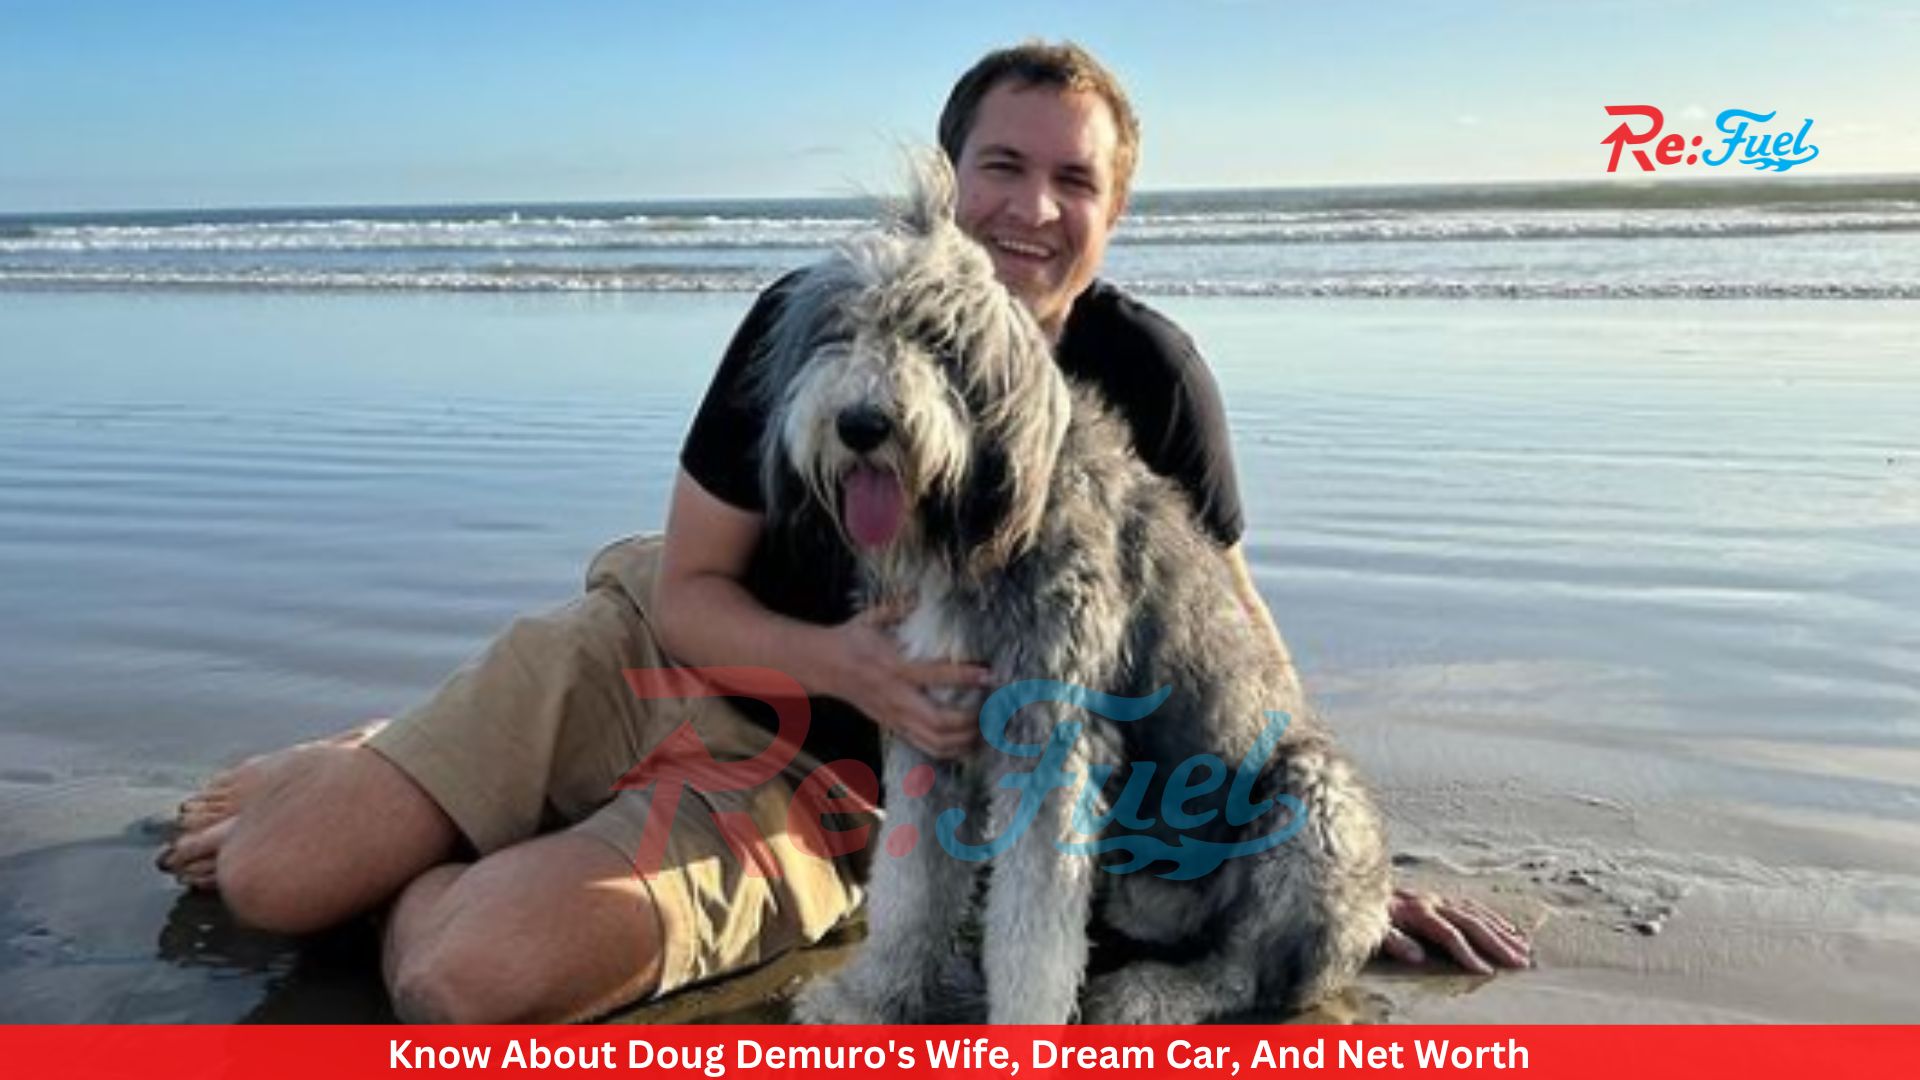 Know About Doug Demuro's Wife, Dream Car, And Net Worth